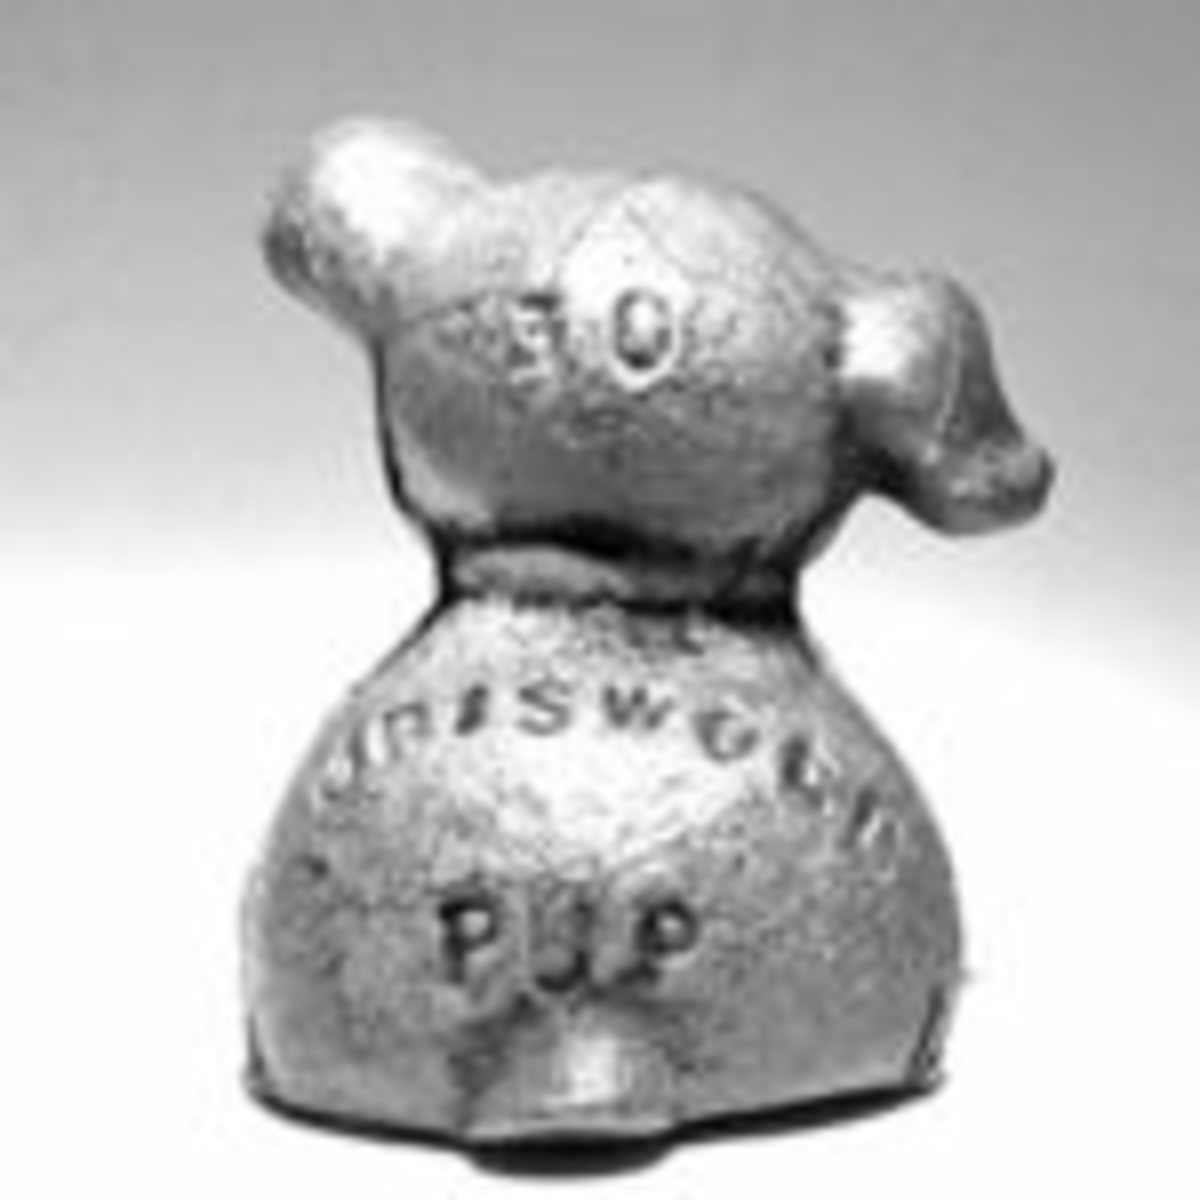 Griswold Pup Paperweight Solid Cast Iron Metal Patina Finish Vintage Style Vg/Ex 